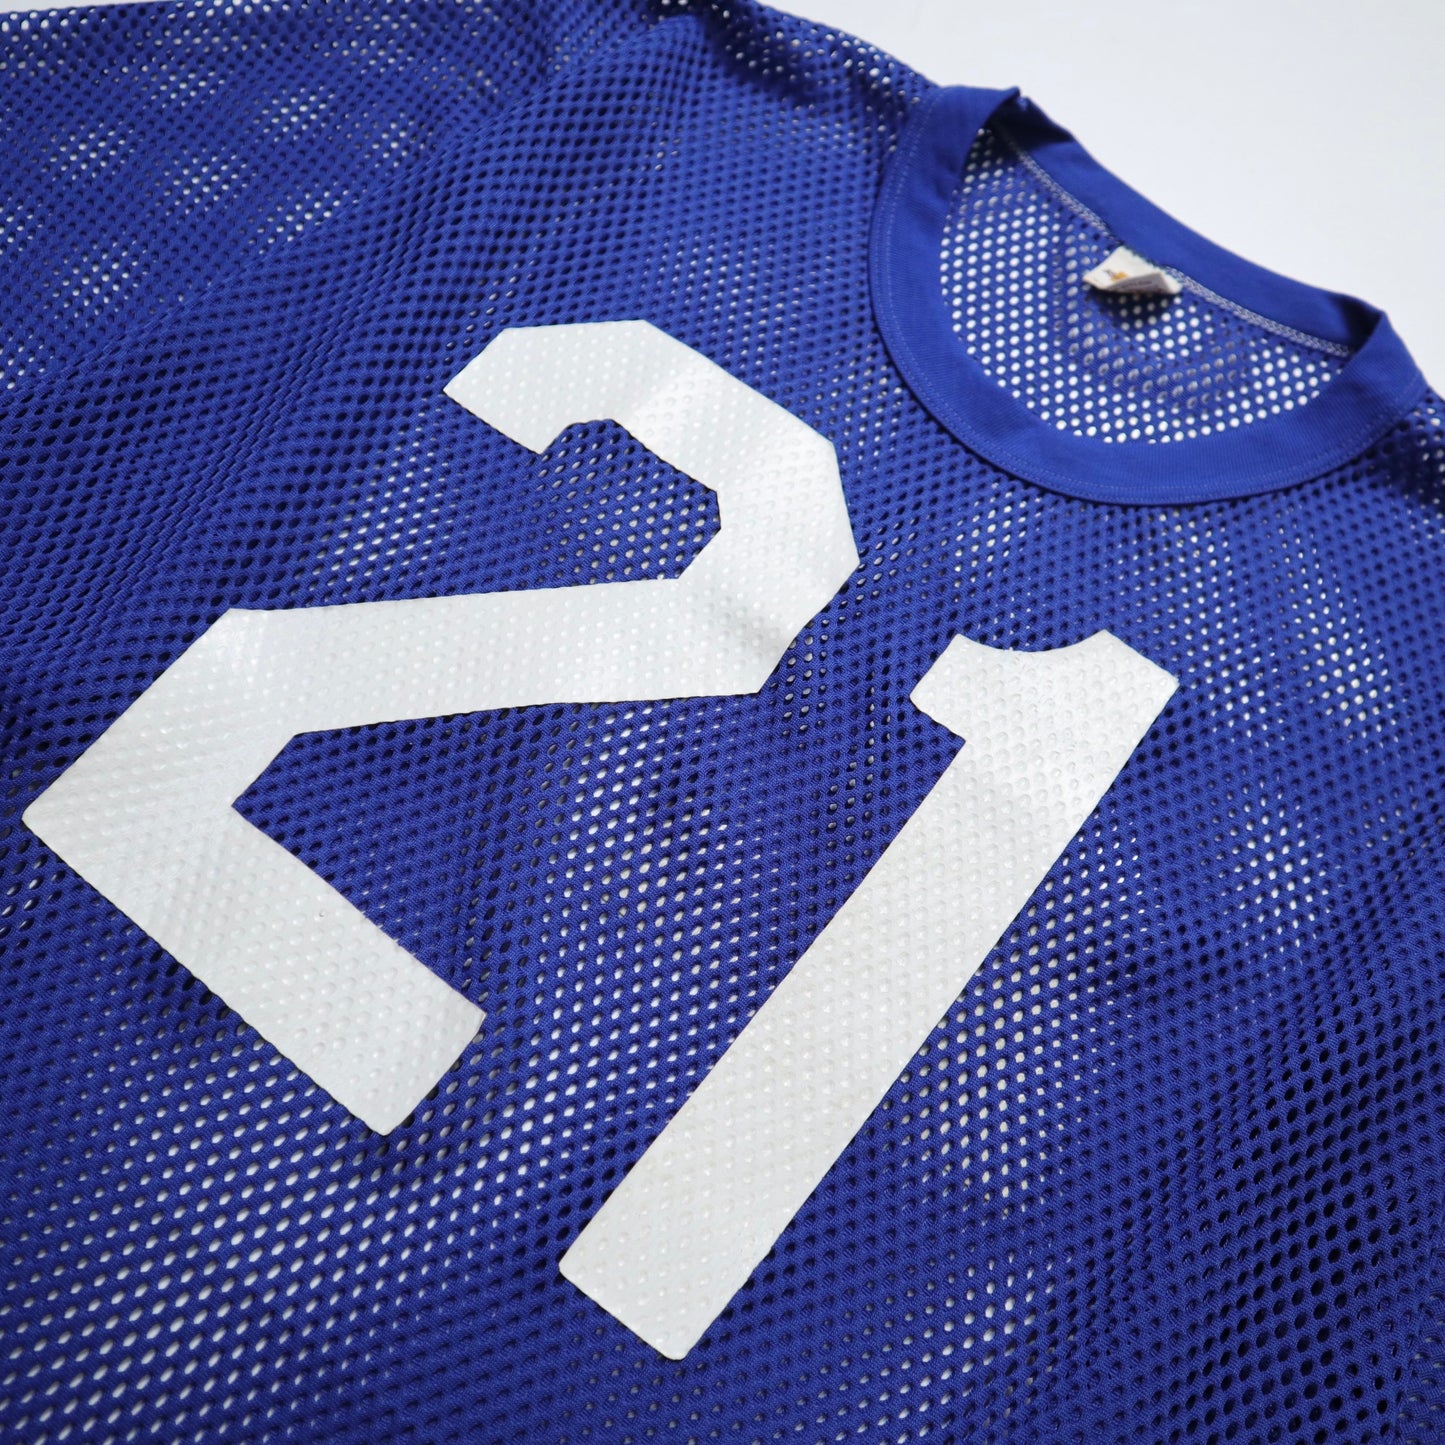 70-80s Russell American-made royal blue American football net jersey